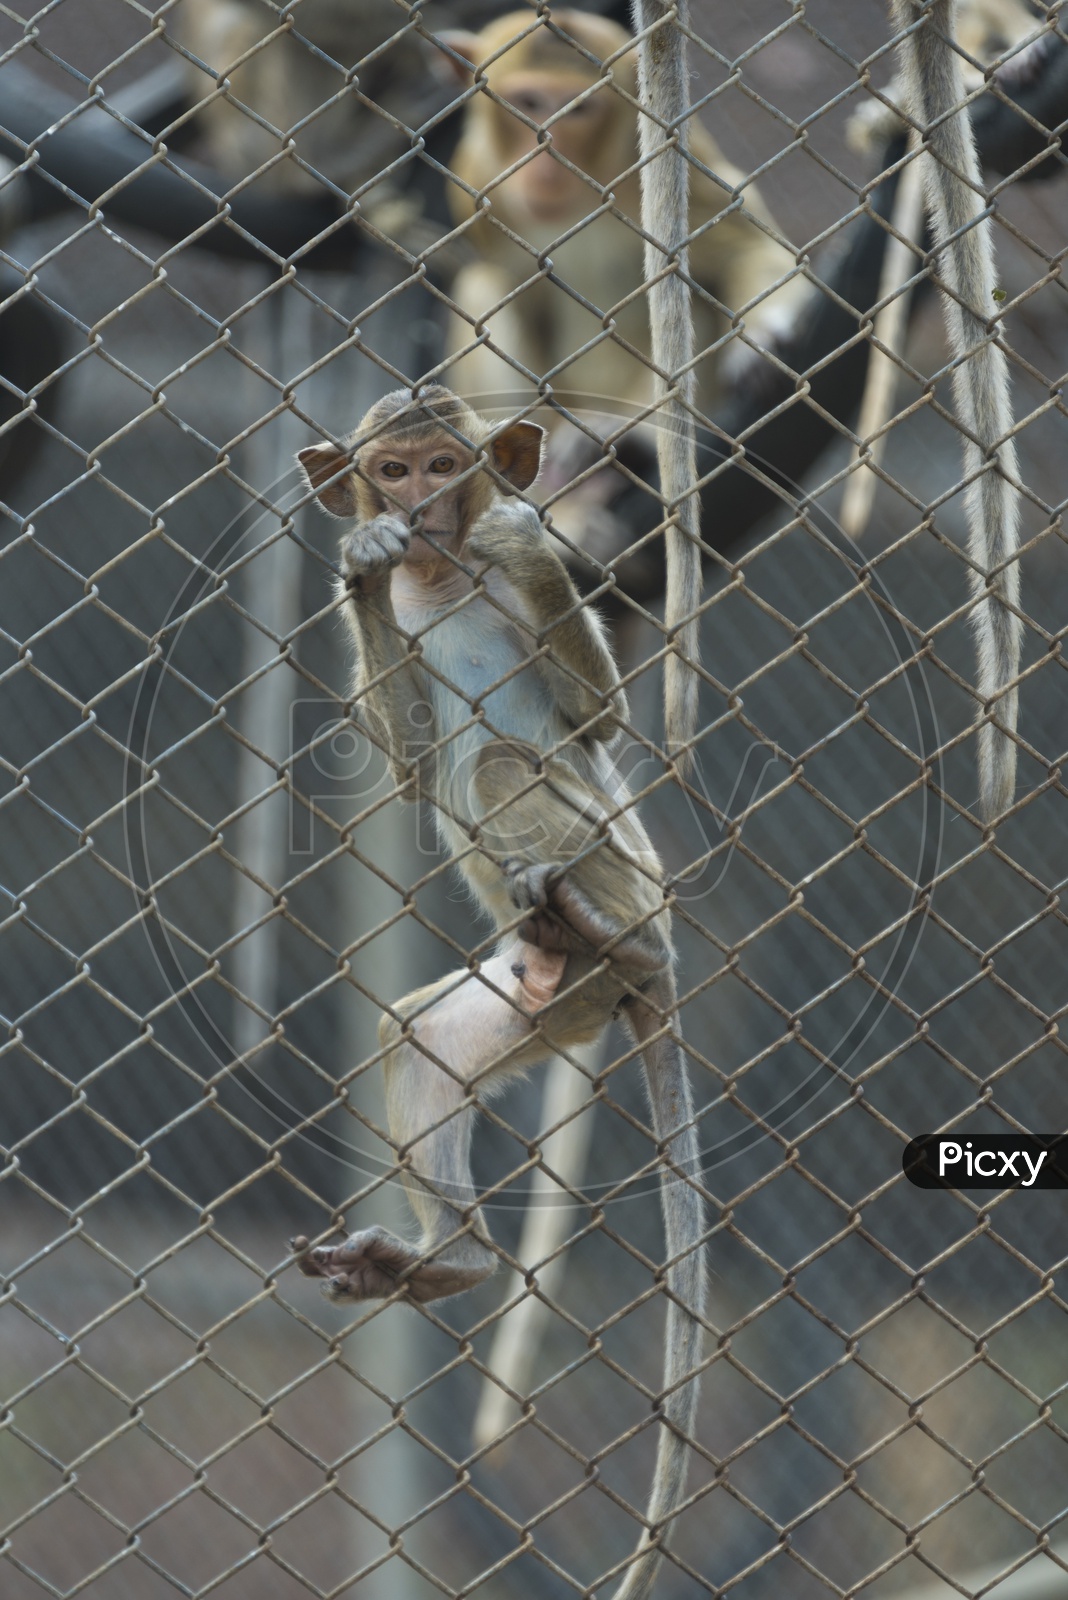 Young Monkey in a Zoo Cage